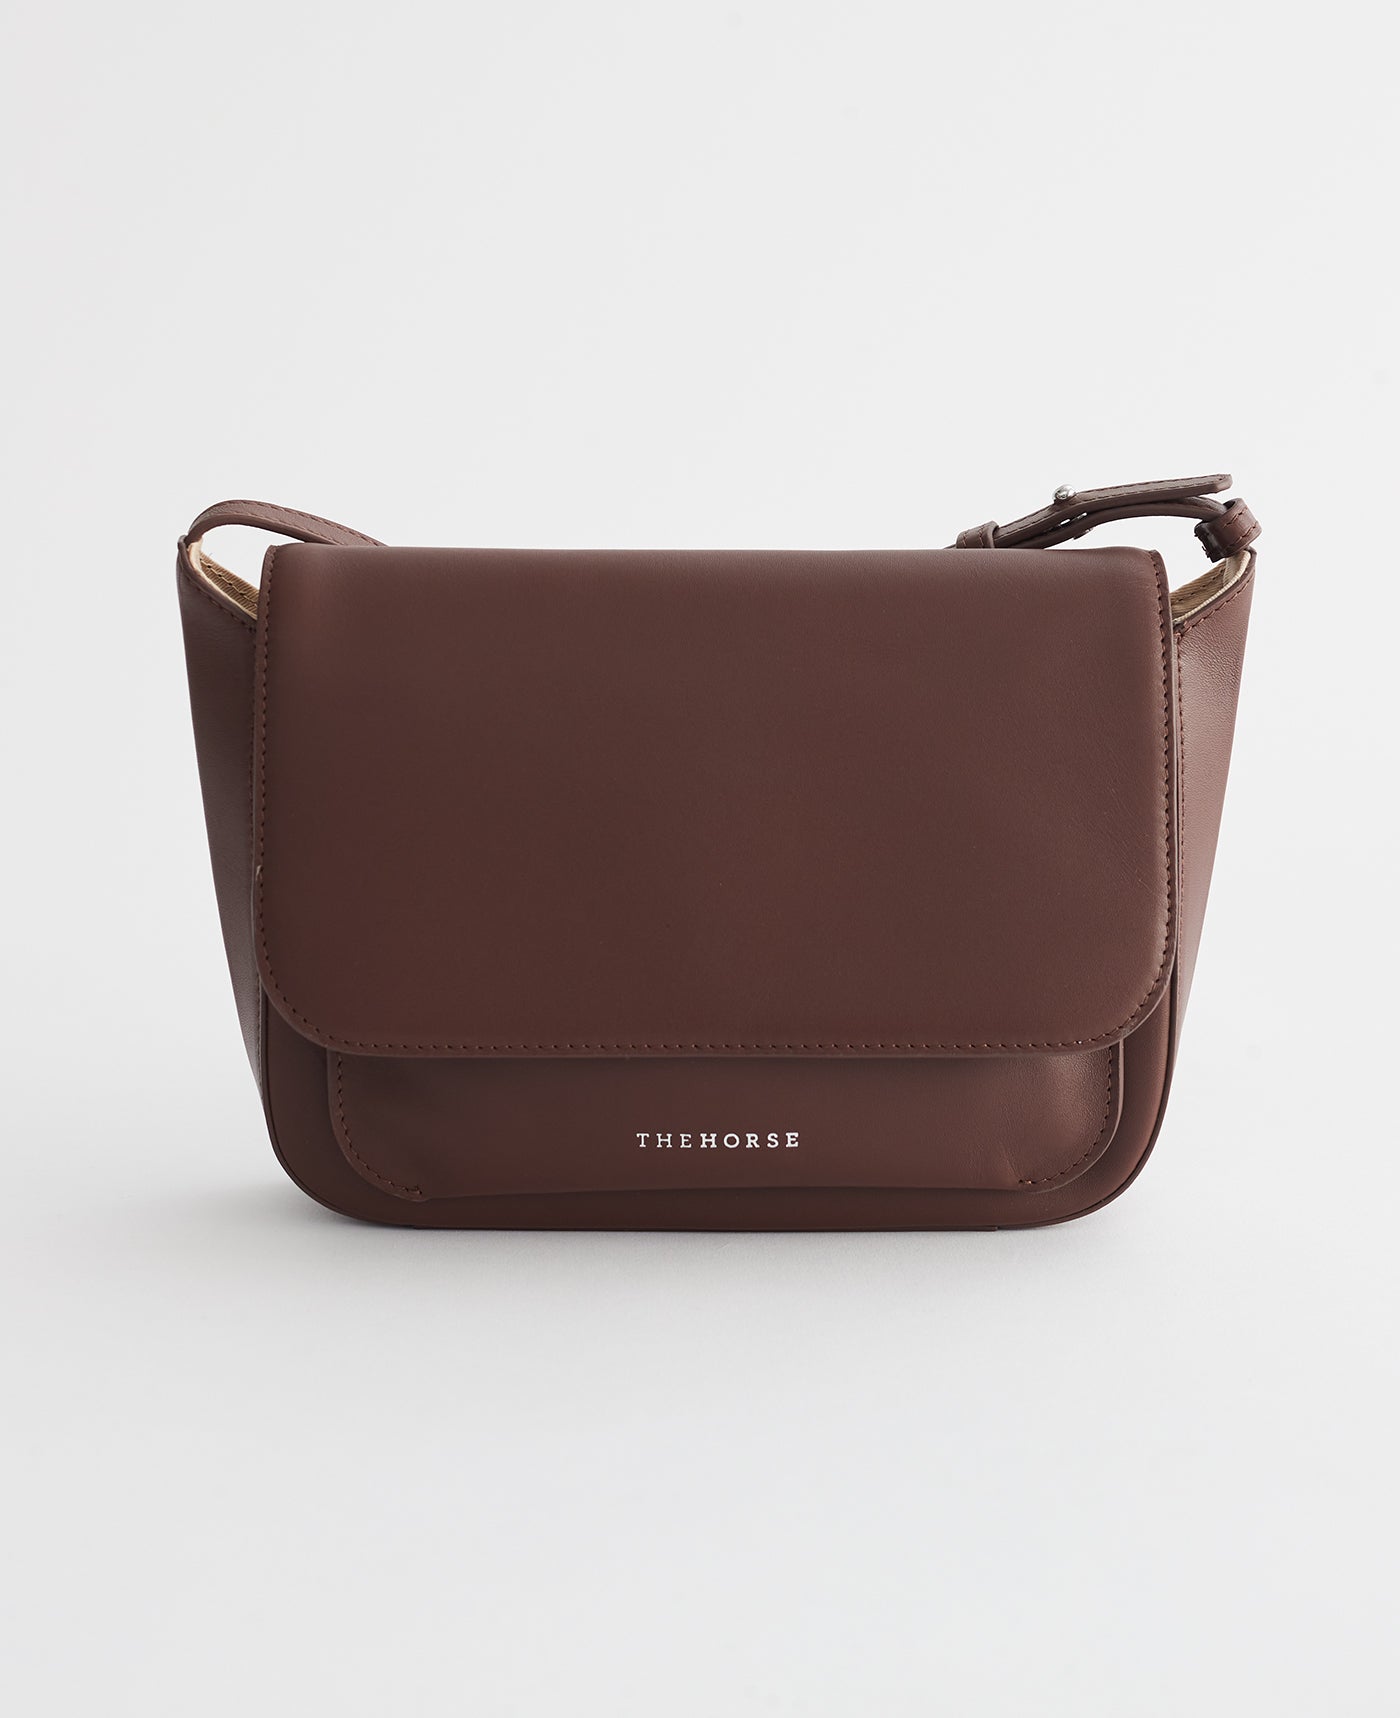 The Medium Remmy Bag: Leather Shoulder Bag in Coffee by The Horse®